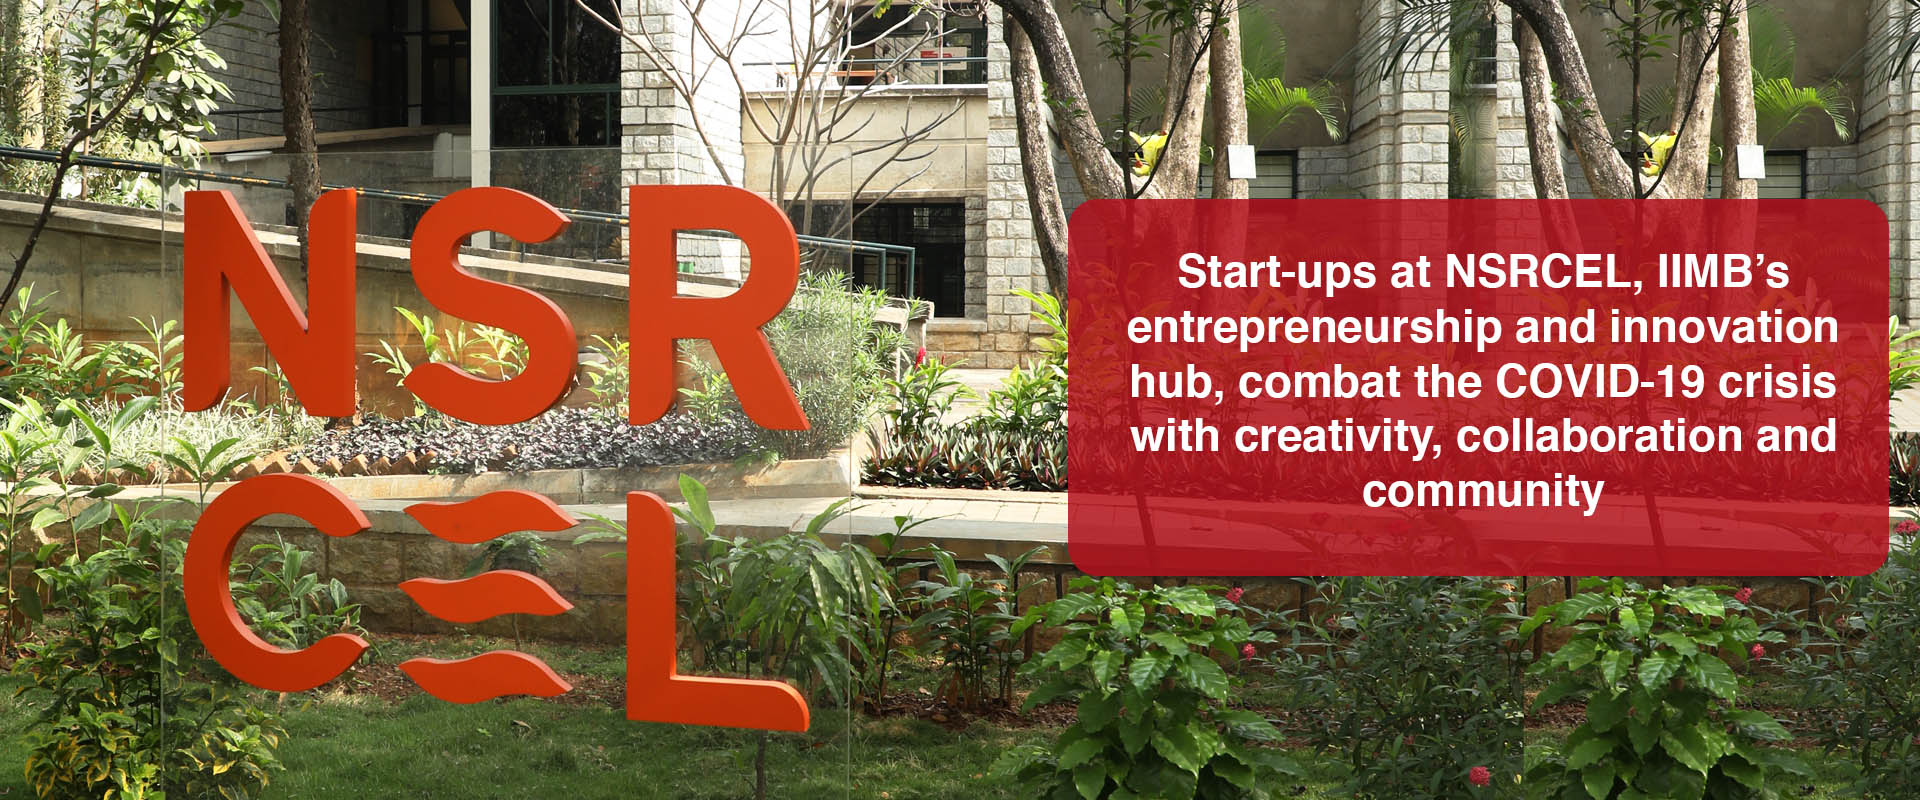 Start-ups at NSRCEL, IIMB’s entrepreneurship and innovation hub, combat the COVID-19 crisis with creativity, collaboration and community